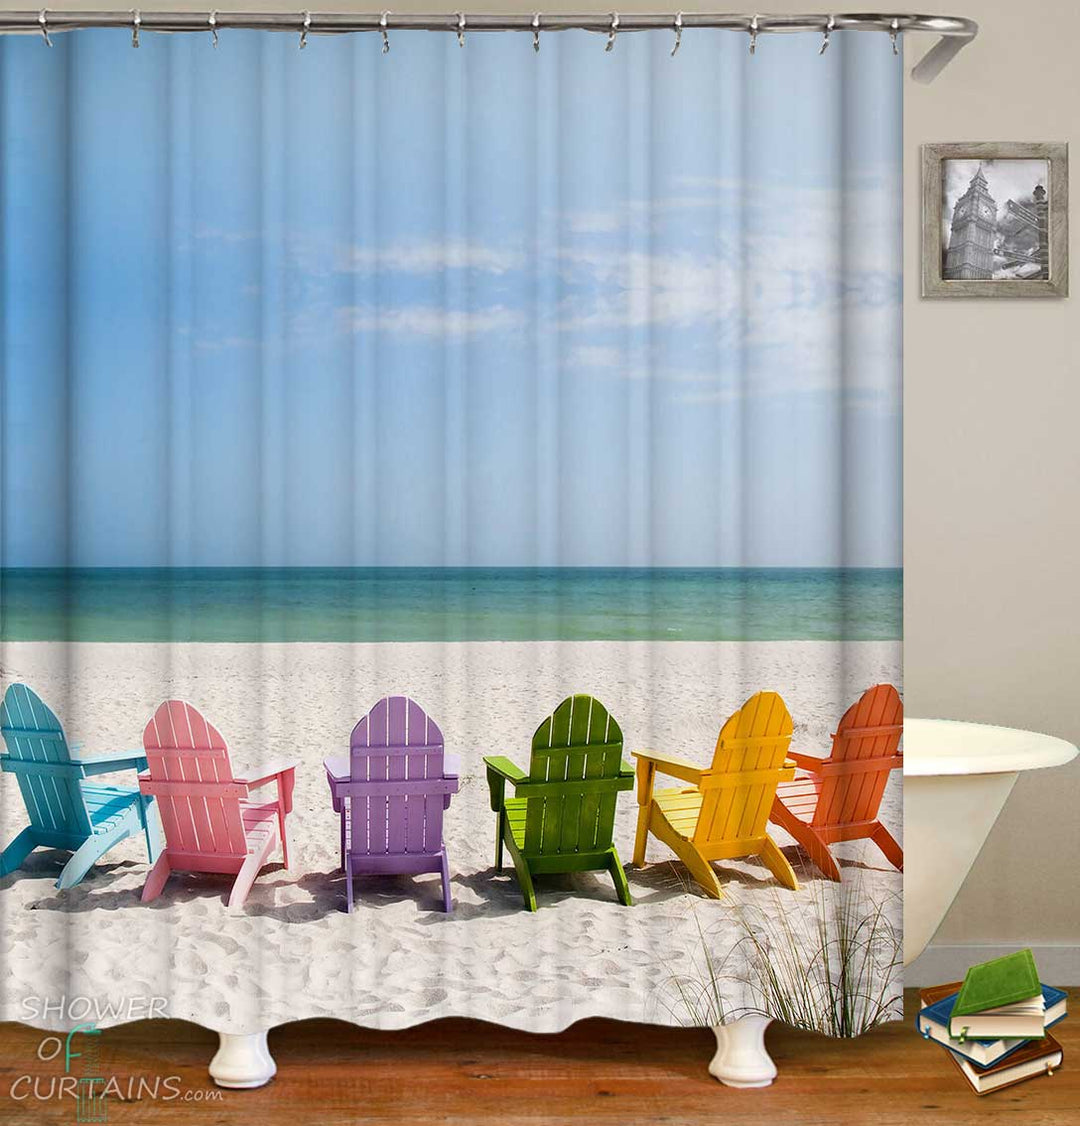 Shower Curtains with Multi Colored Beach Chairs